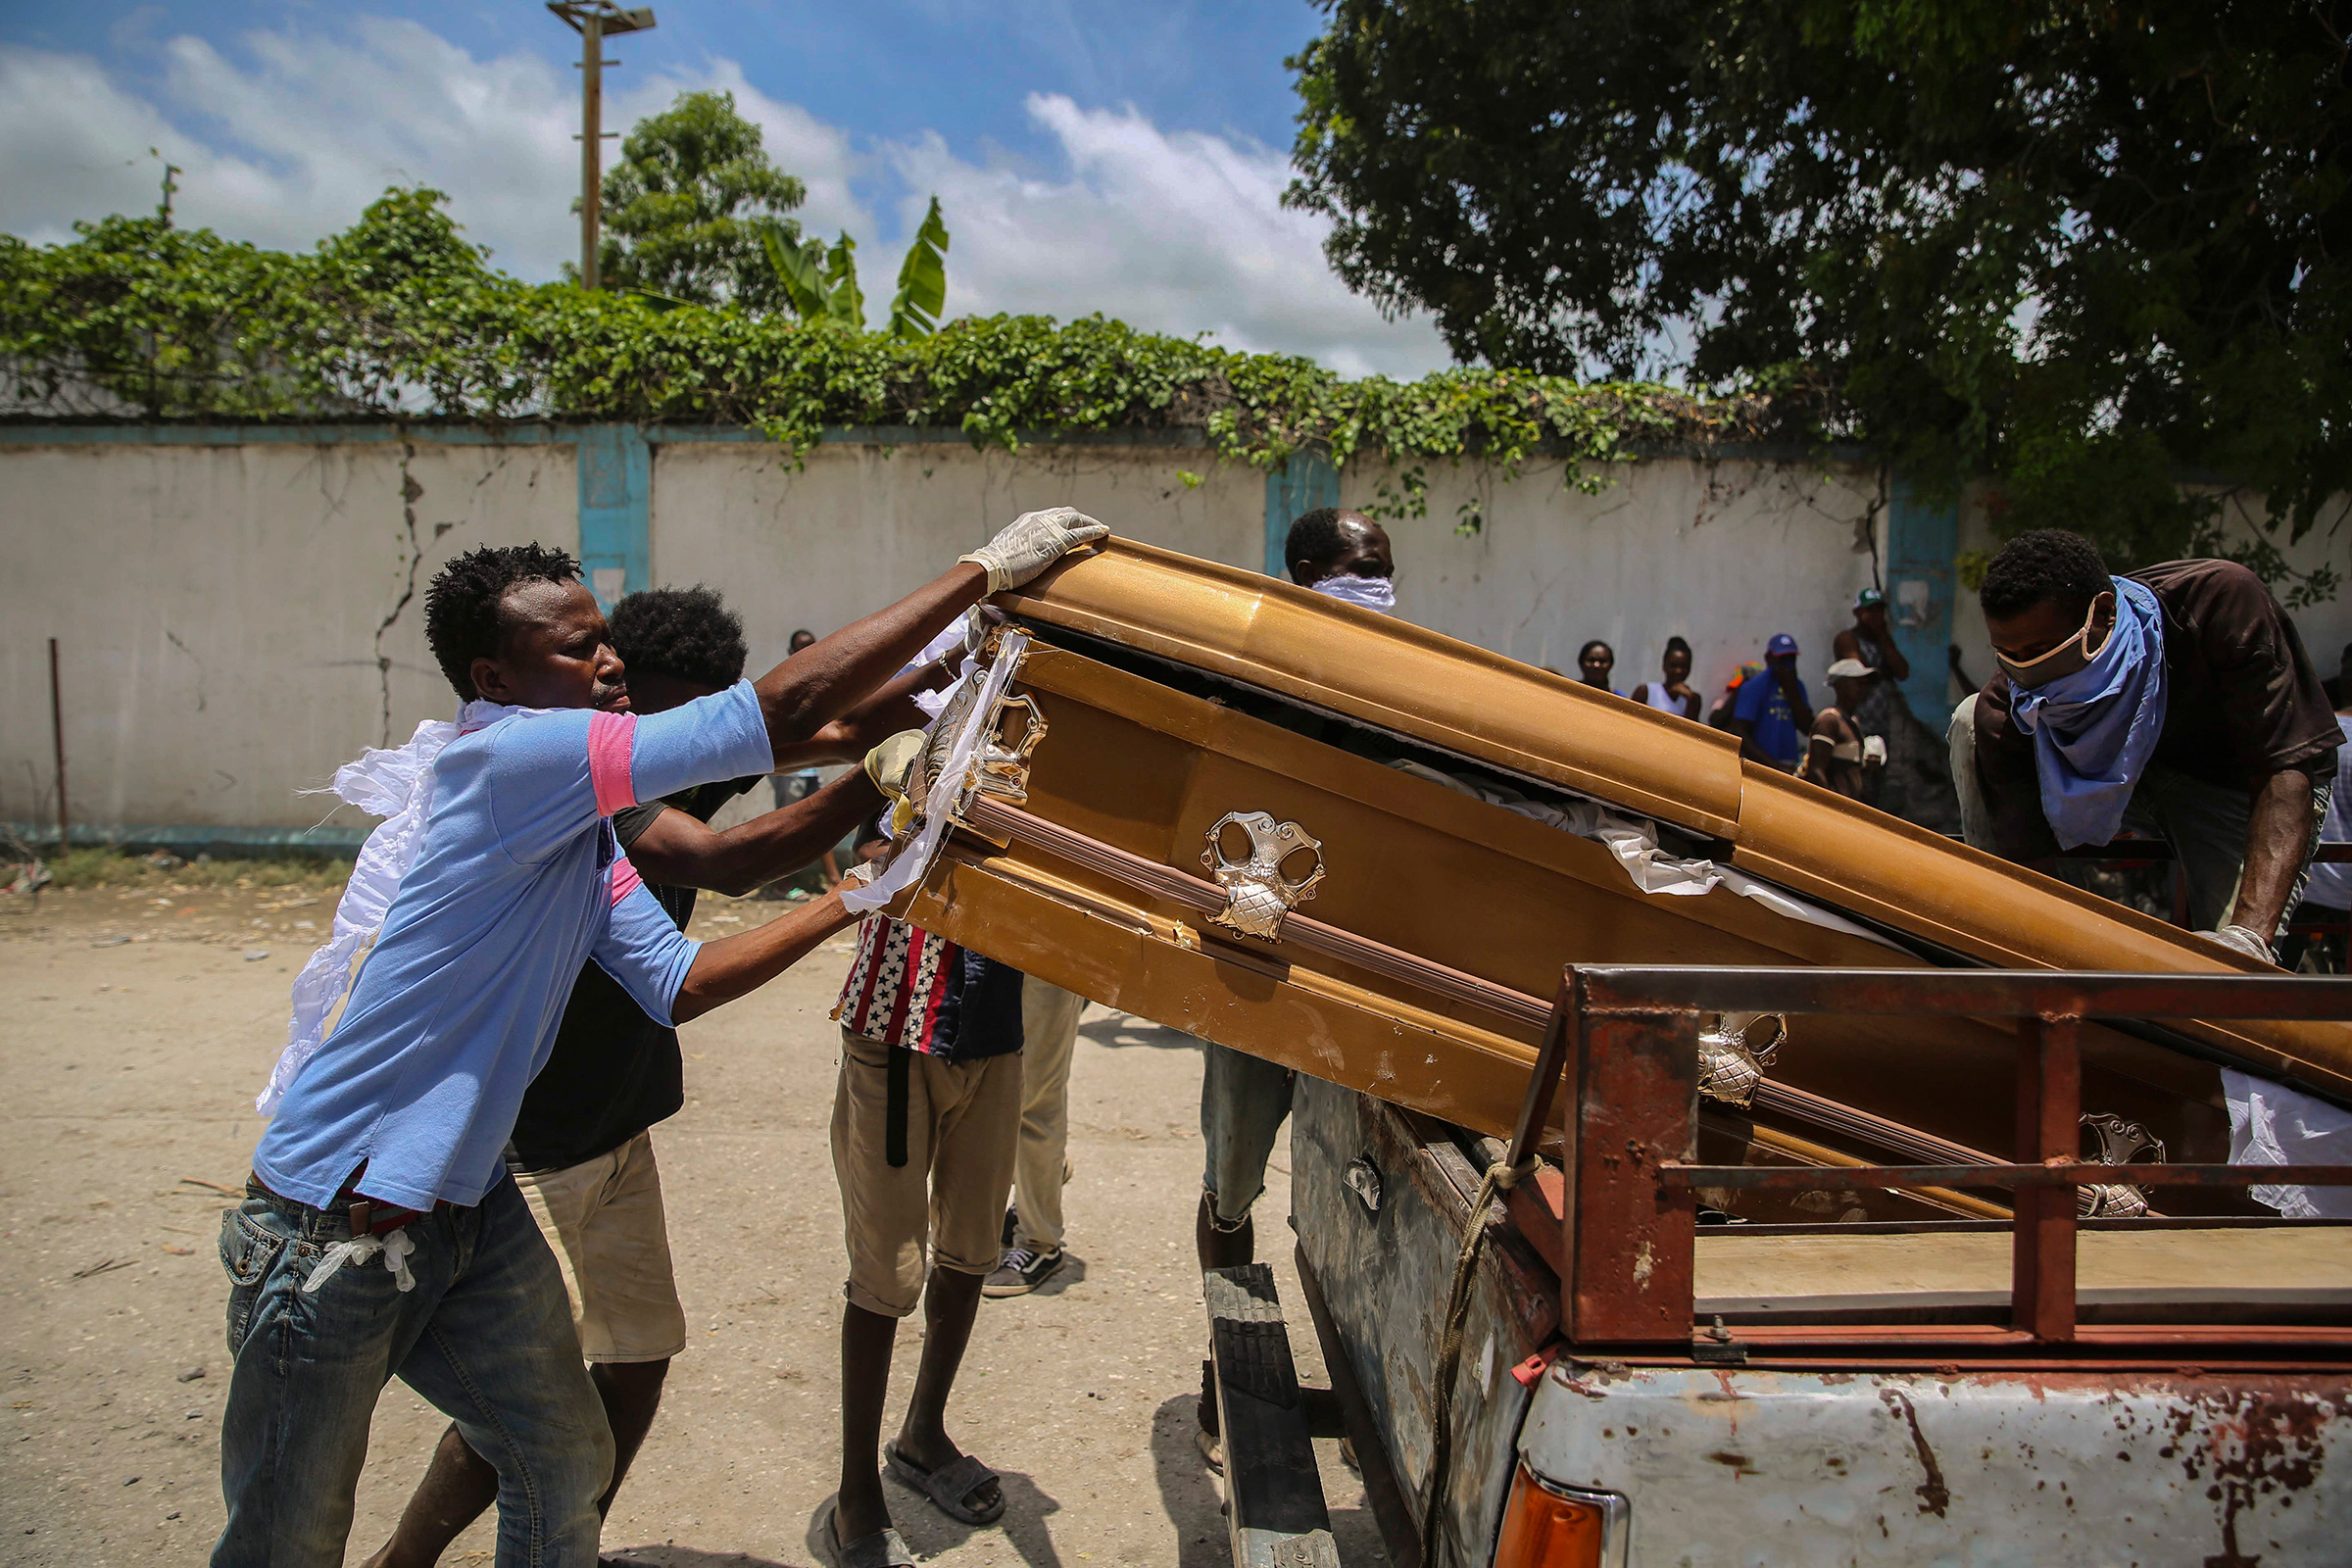 Men load the coffin containing the remains of Francois Elmay, after recovering his body from the rubble of a home, in Les Cayes on Aug. 18. (Joseph Odelyn—AP)